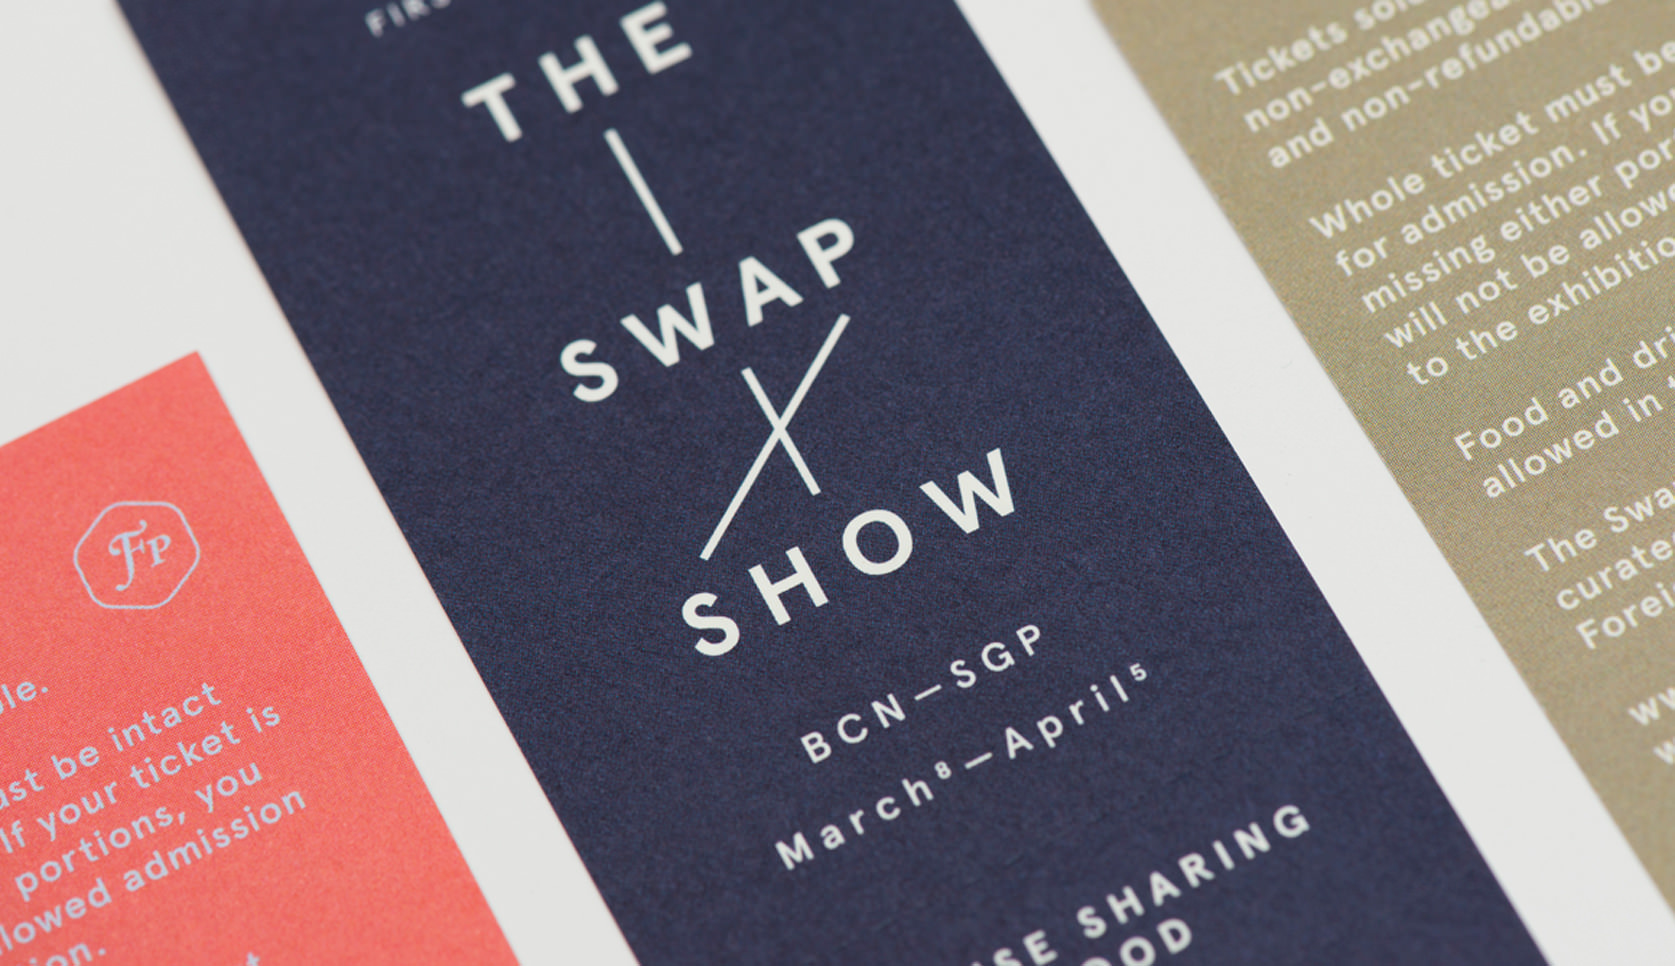 The Swap Show - Foreign Policy